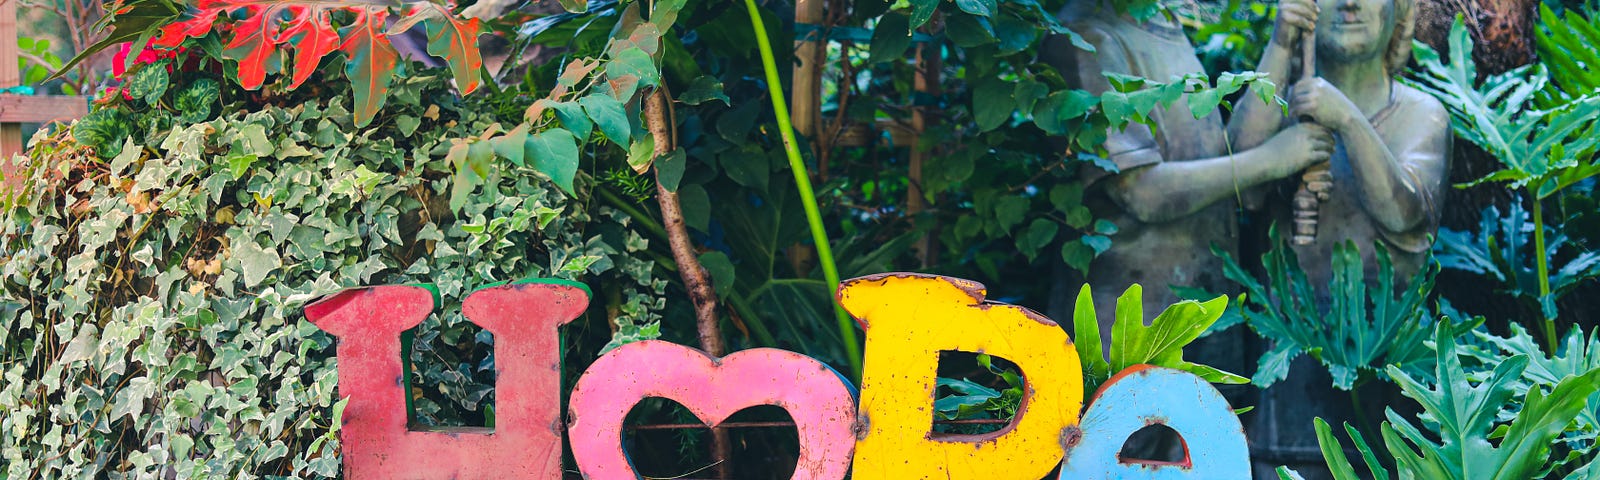 The word “hope” spelled out in colorful letters with a statue of two children in a forested background.